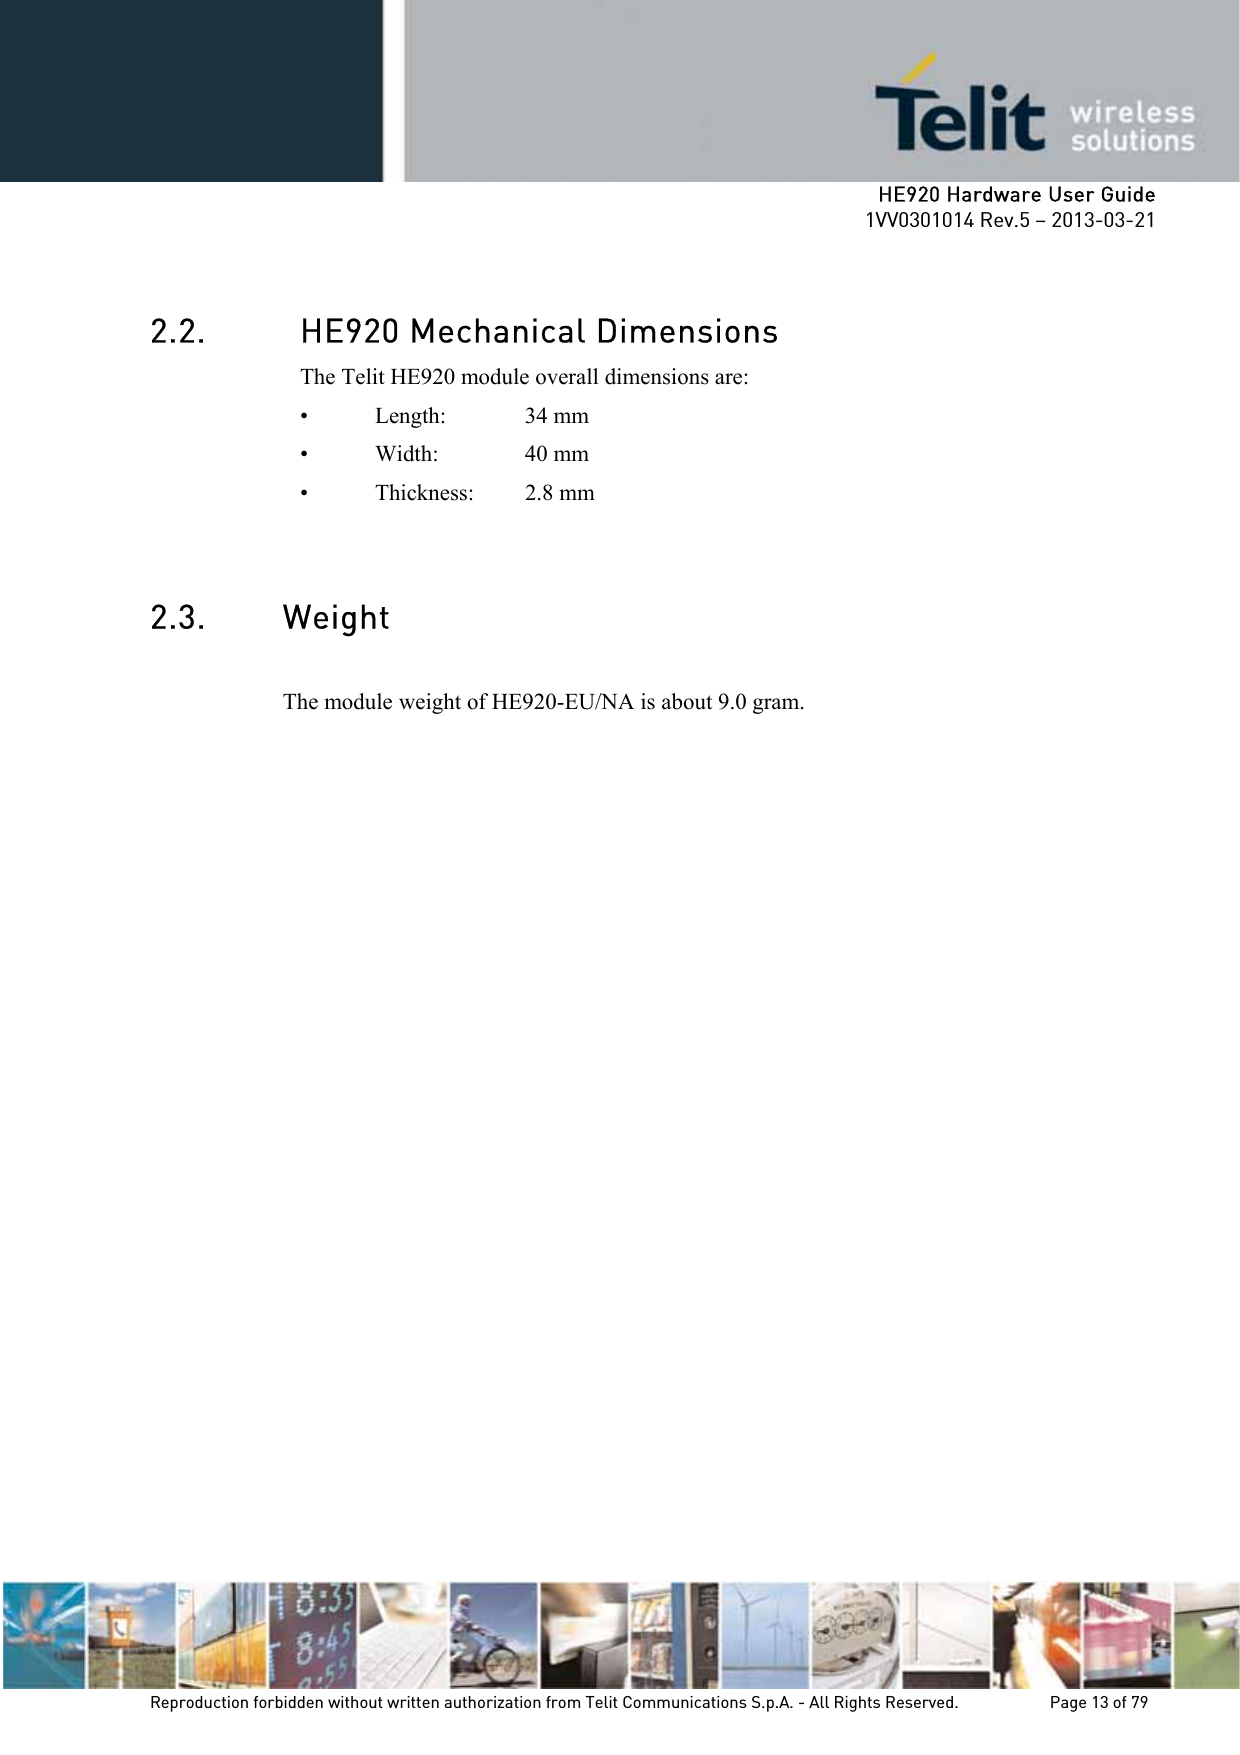     HE920 Hardware User Guide 1VV0301014 Rev.5 – 2013-03-21 Reproduction forbidden without written authorization from Telit Communications S.p.A. - All Rights Reserved.    Page 13 of 79   2.2. HE920 Mechanical Dimensions The Telit HE920 module overall dimensions are:  • Length:   34 mm •  Width:    40 mm •  Thickness:   2.8 mm  2.3. Weight  The module weight of HE920-EU/NA is about 9.0 gram.  